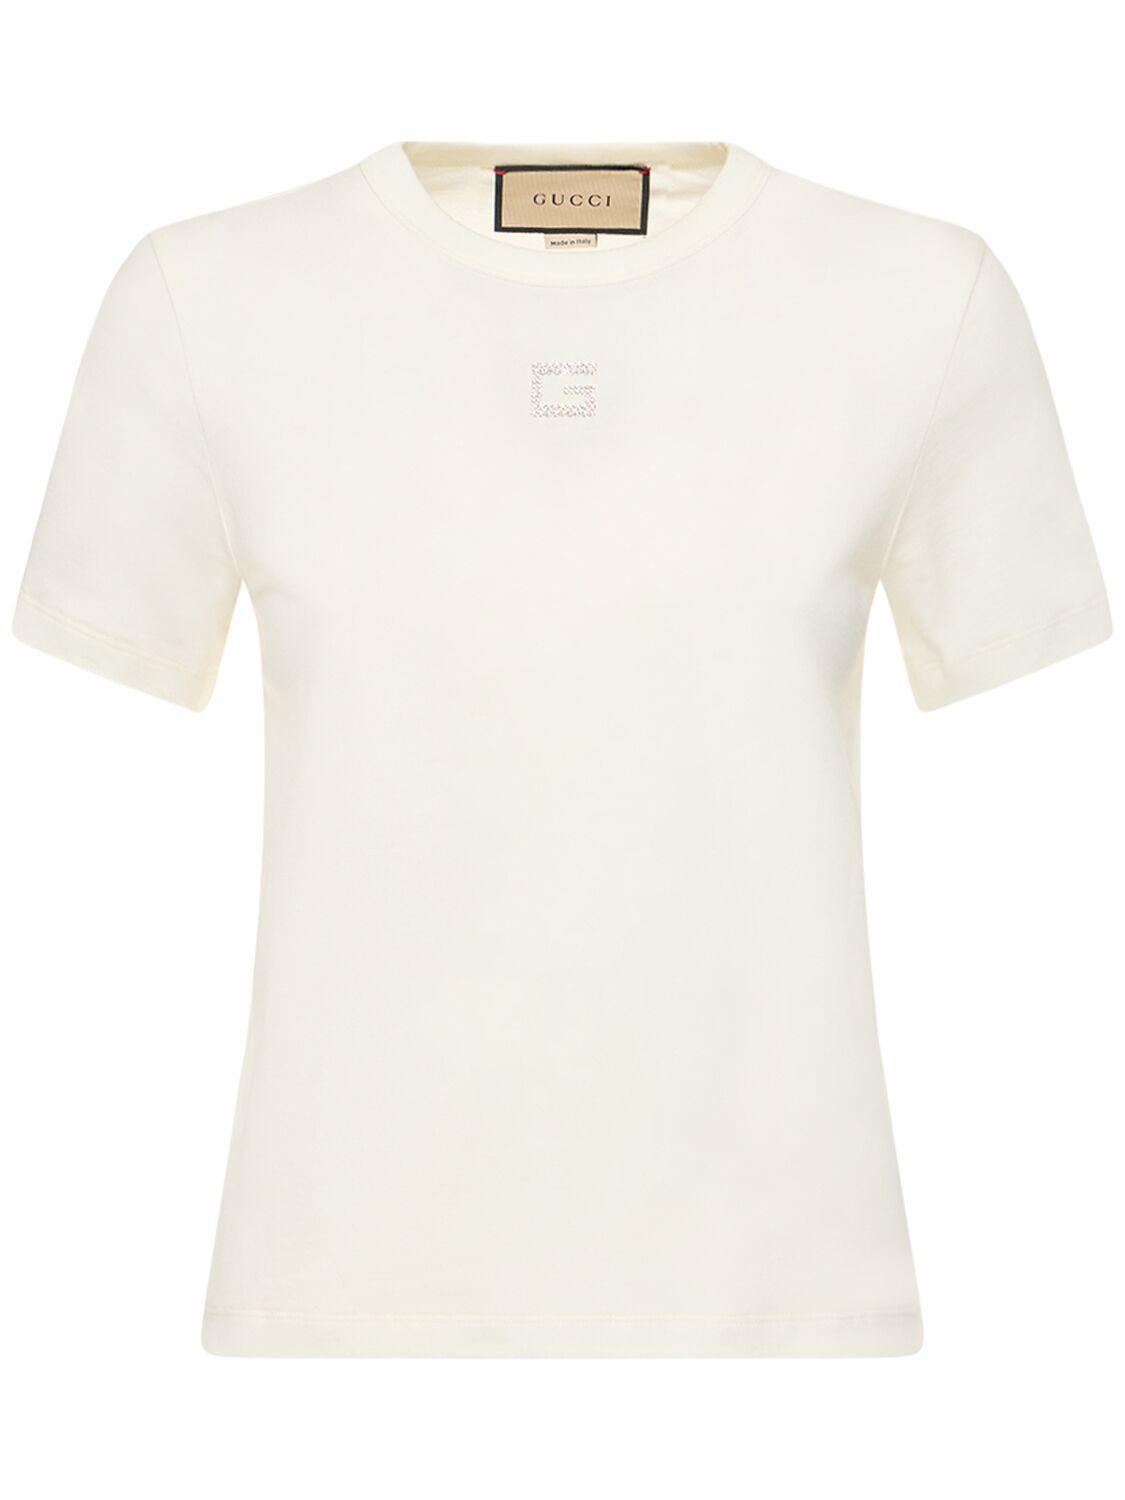 Gucci Cotton Jersey T-Shirt with Gucci Embroidery